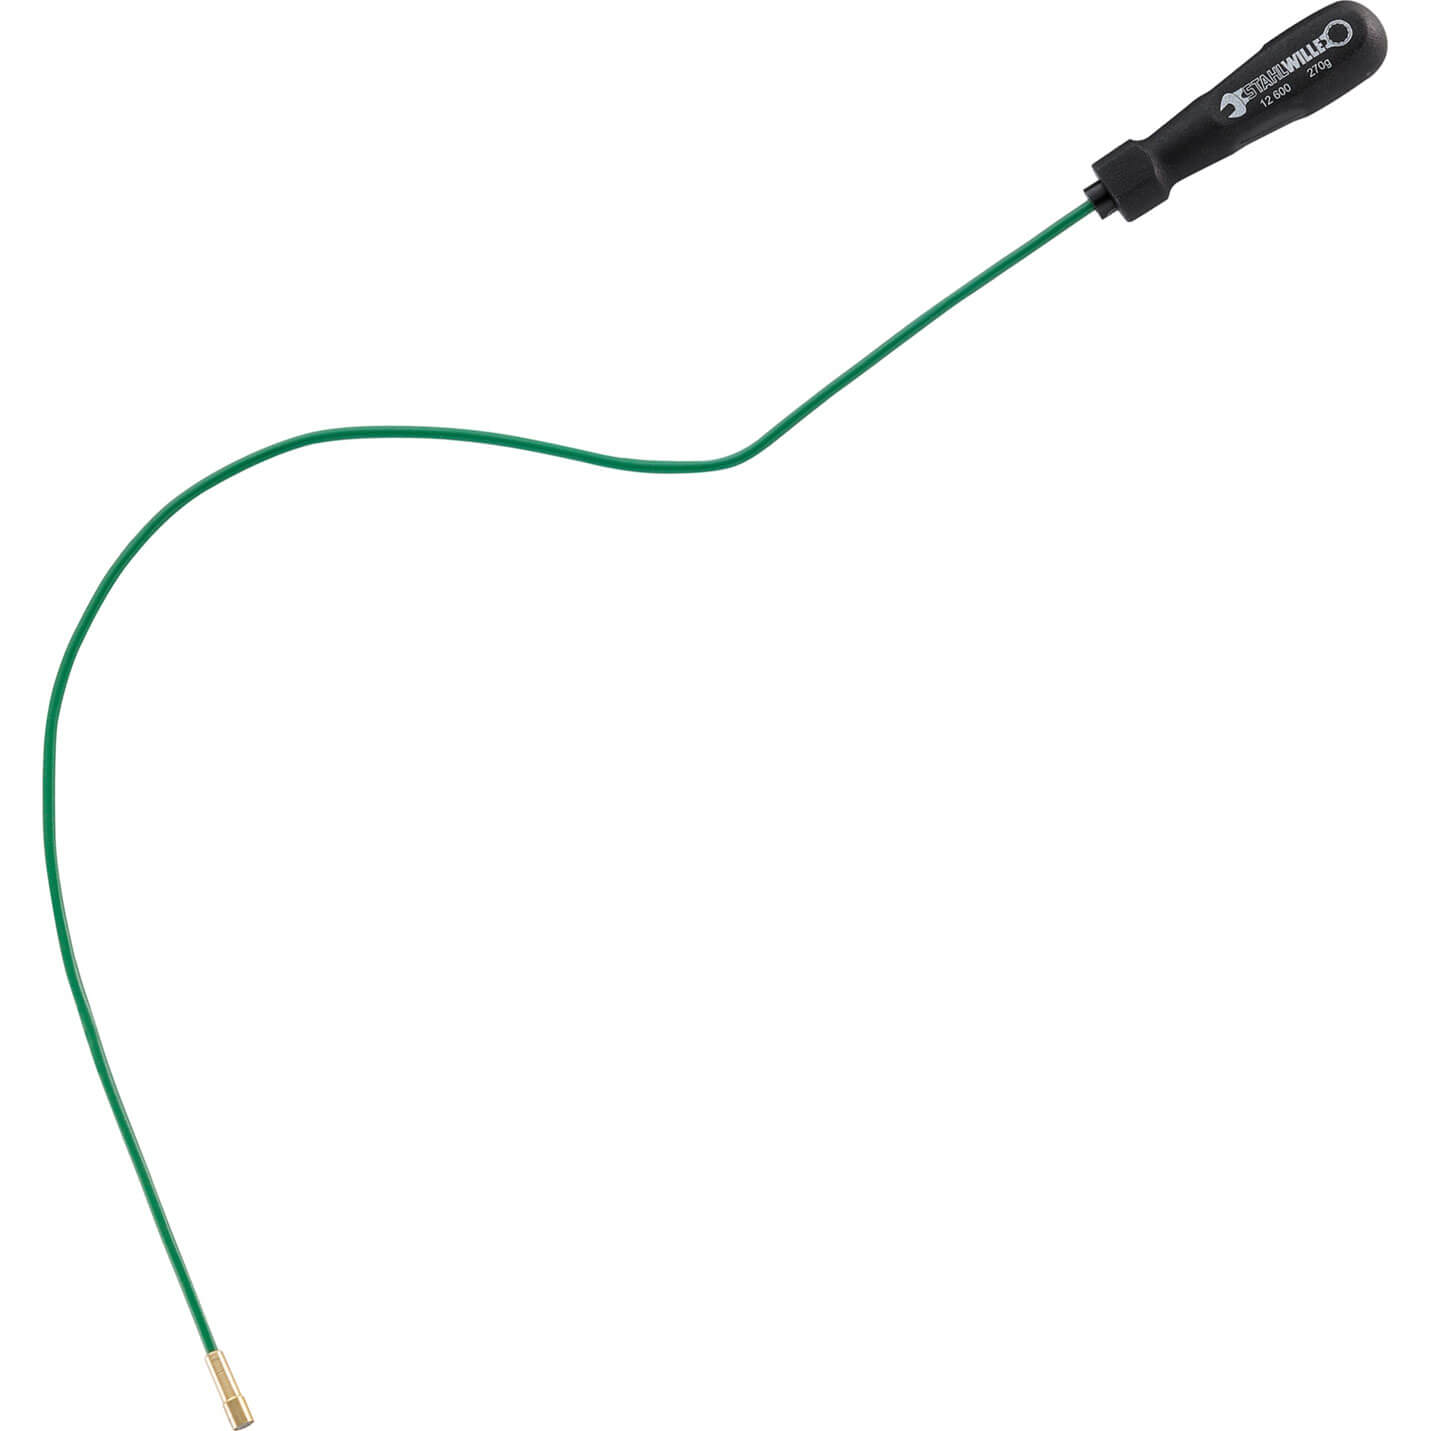 Image of Stahlwille Flexible Magnetic Pick Up Tool